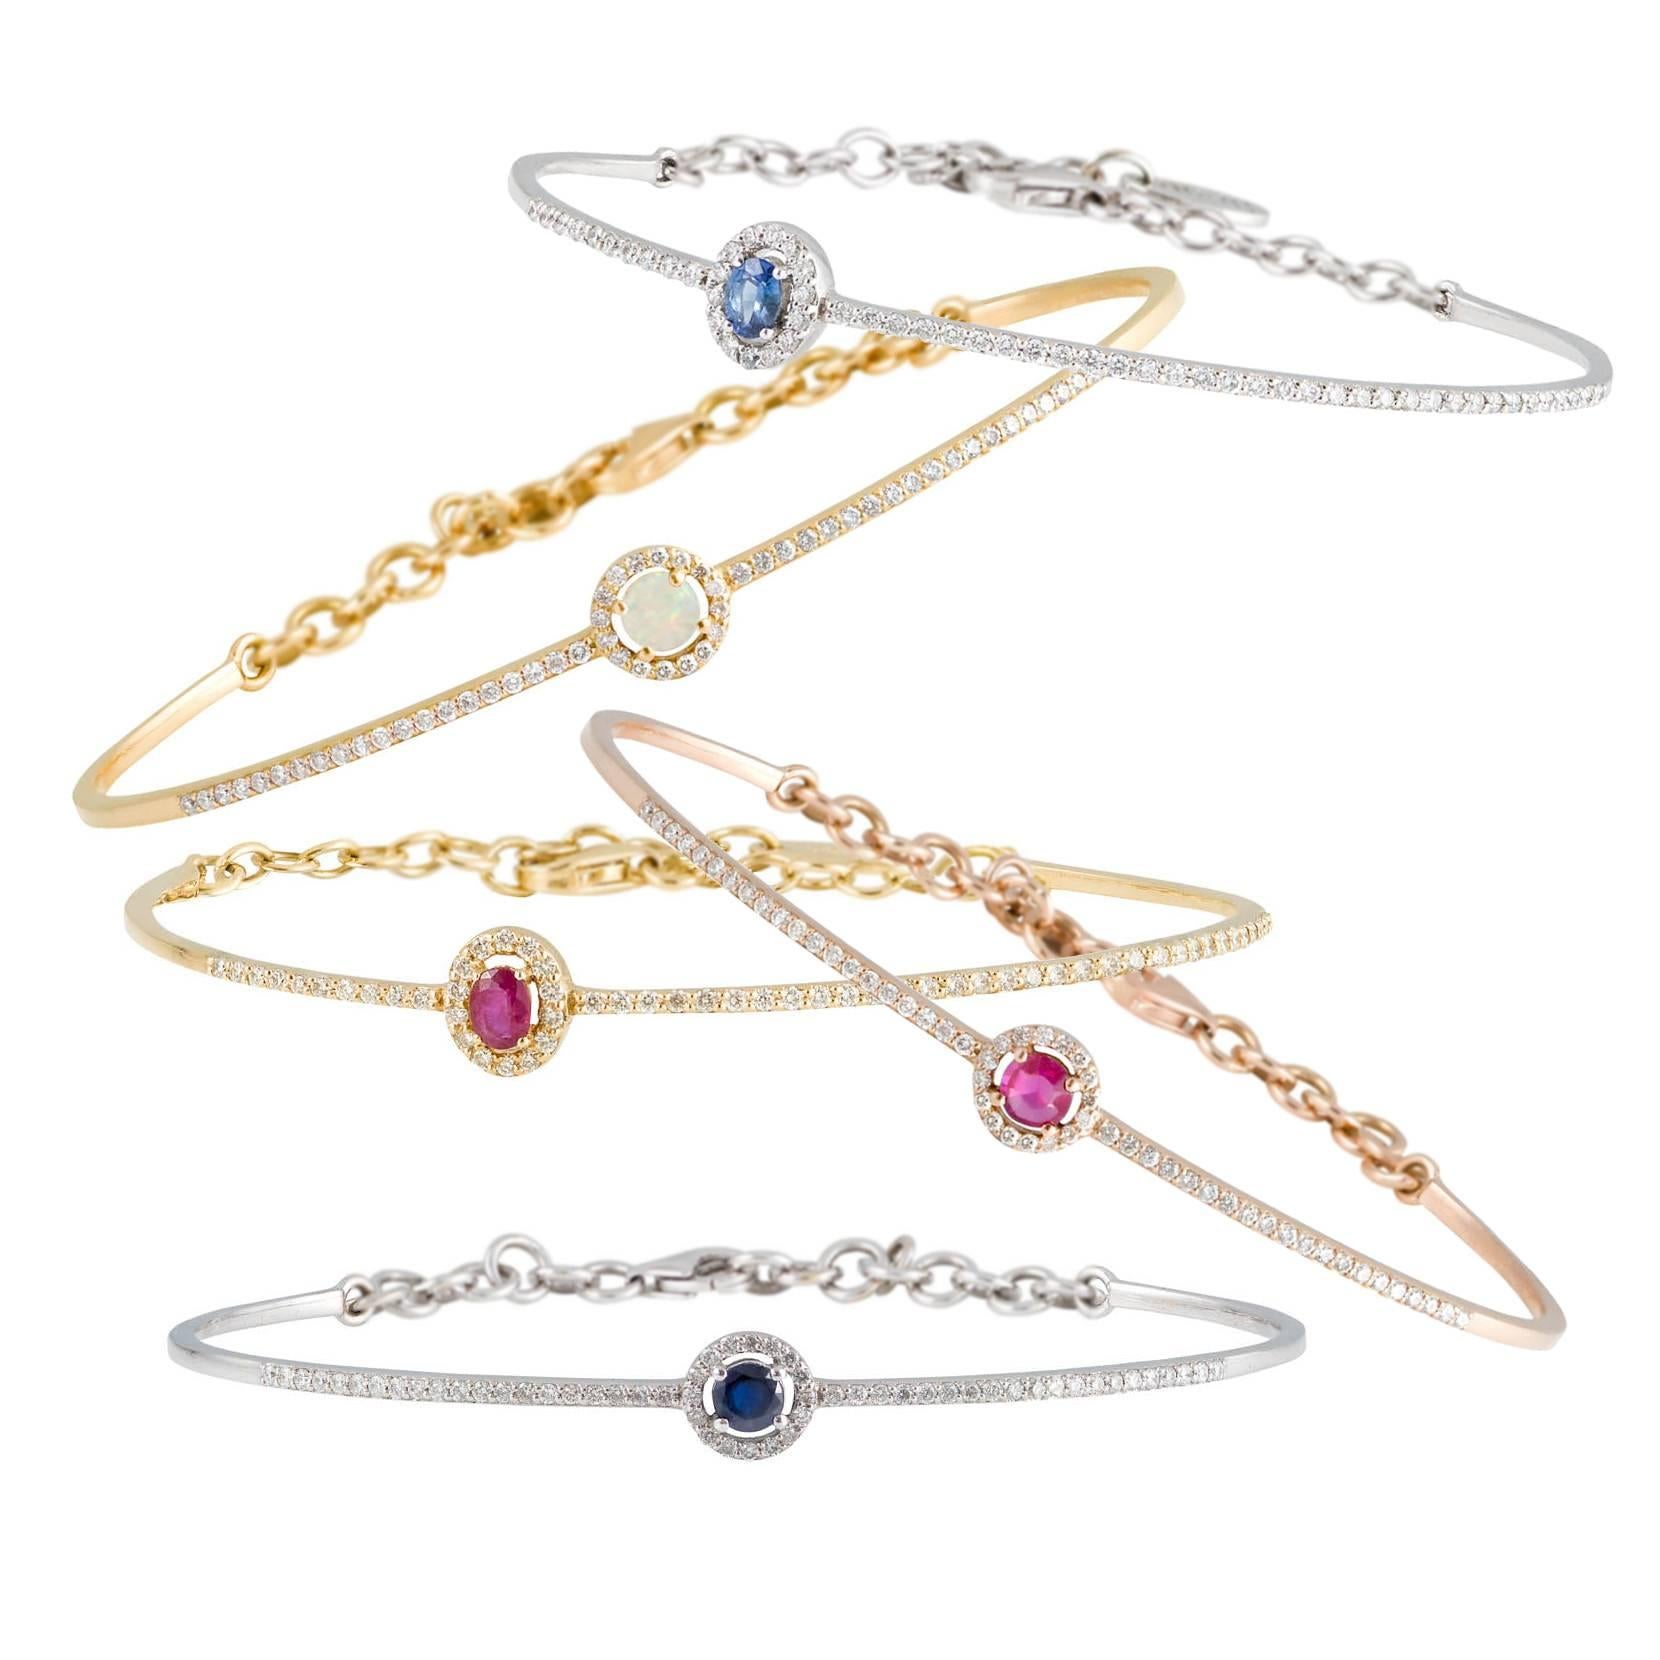 A Diamonds set and Opal accented Rose Pink Gold bangle bracelet. The Ellipse bangle is a delicate and unique design simply by setting the oval diamond halo surrounded gemstone off-center to the bangle. This detail makes a dynamic design and